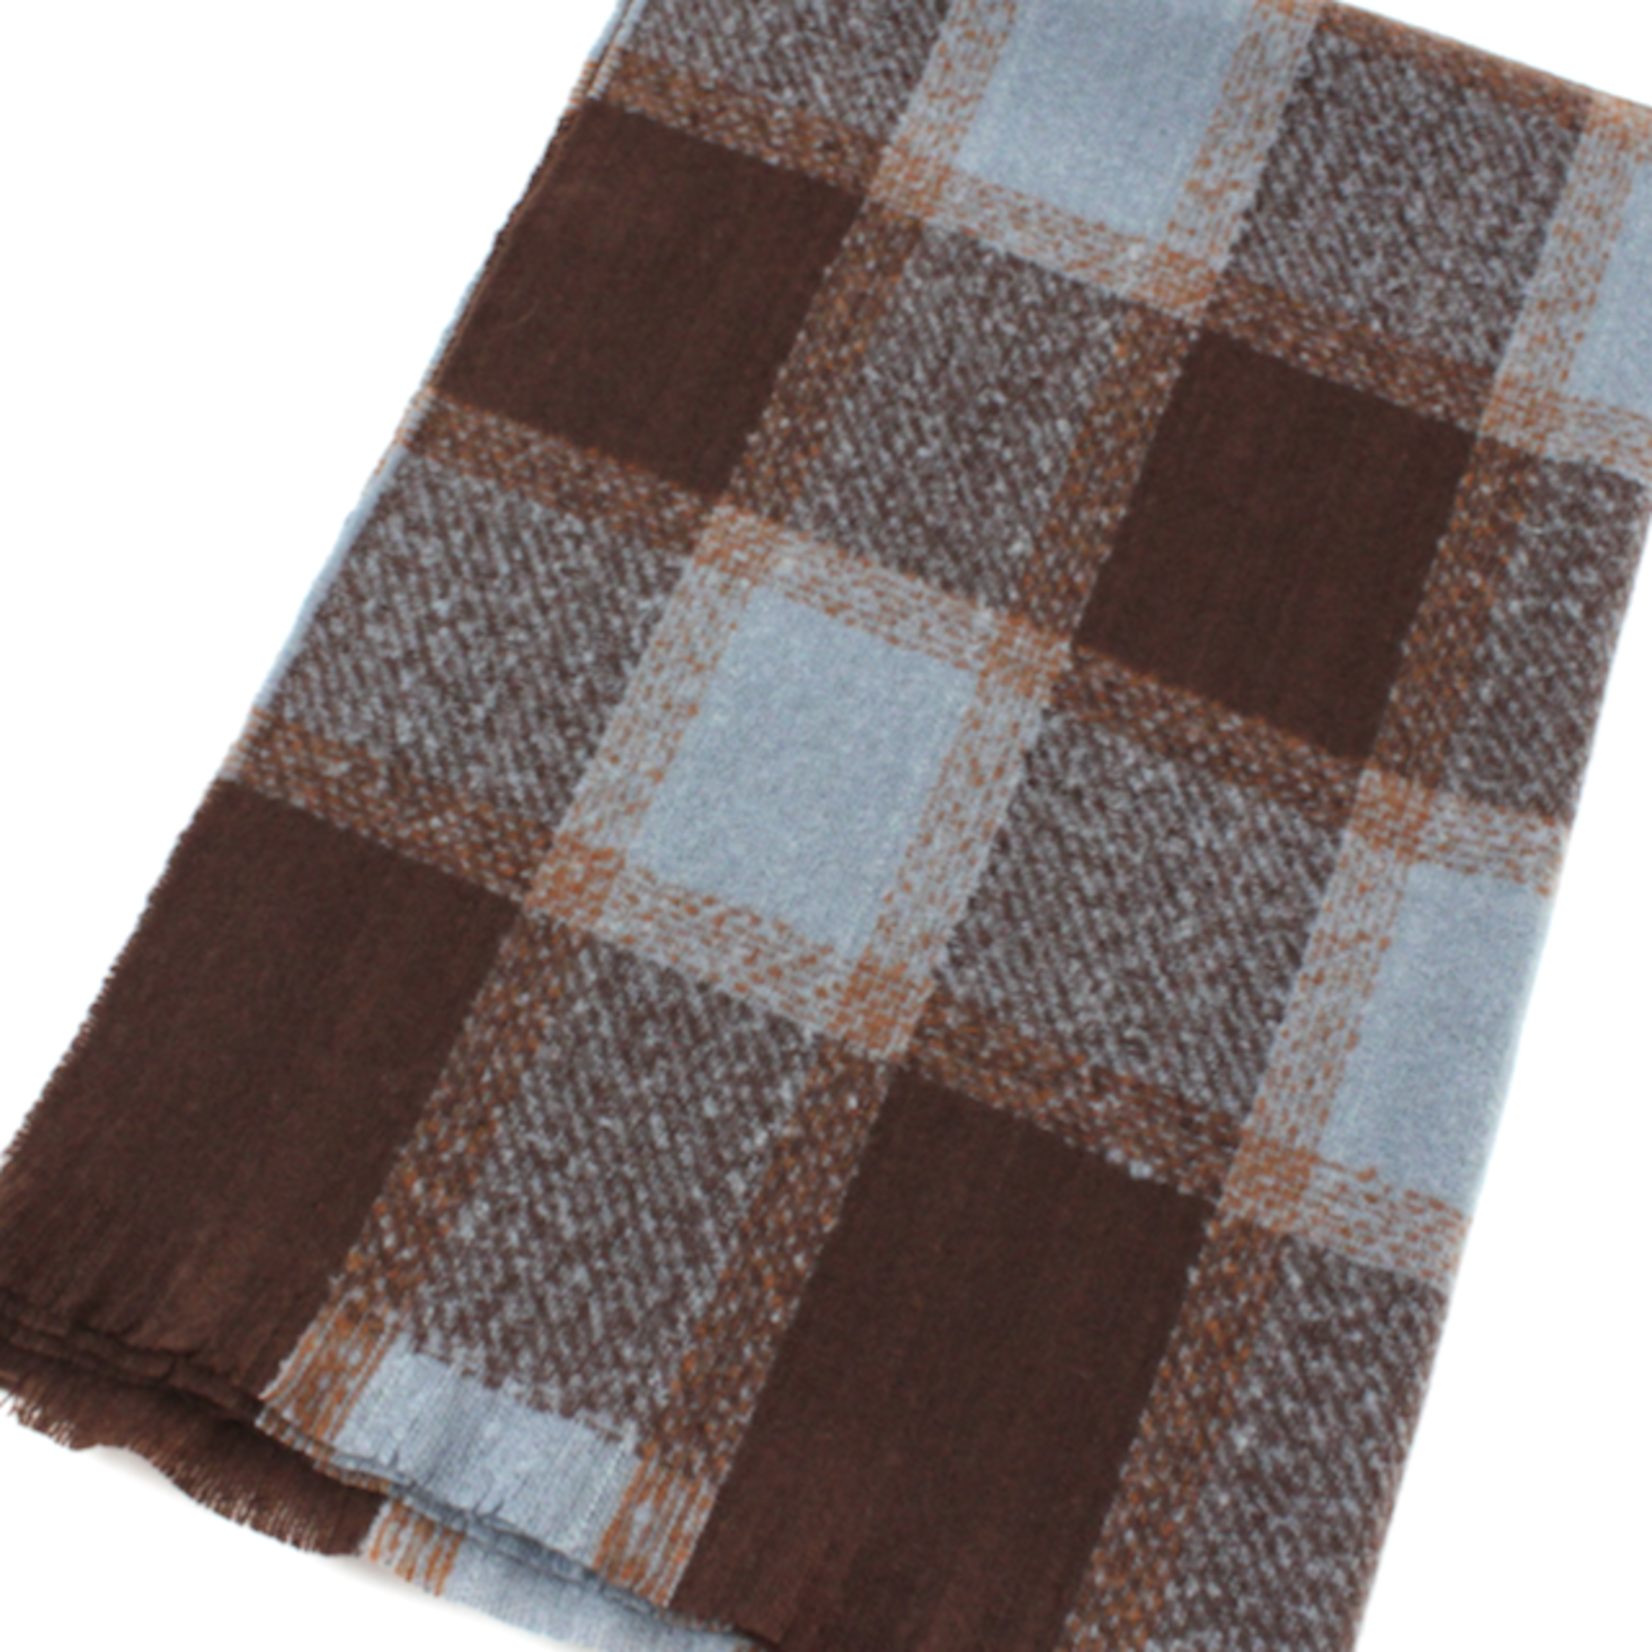 Pretty Persuasions Celtic Song Plaid 79”x25” Scarf in Blue/Brown Combo